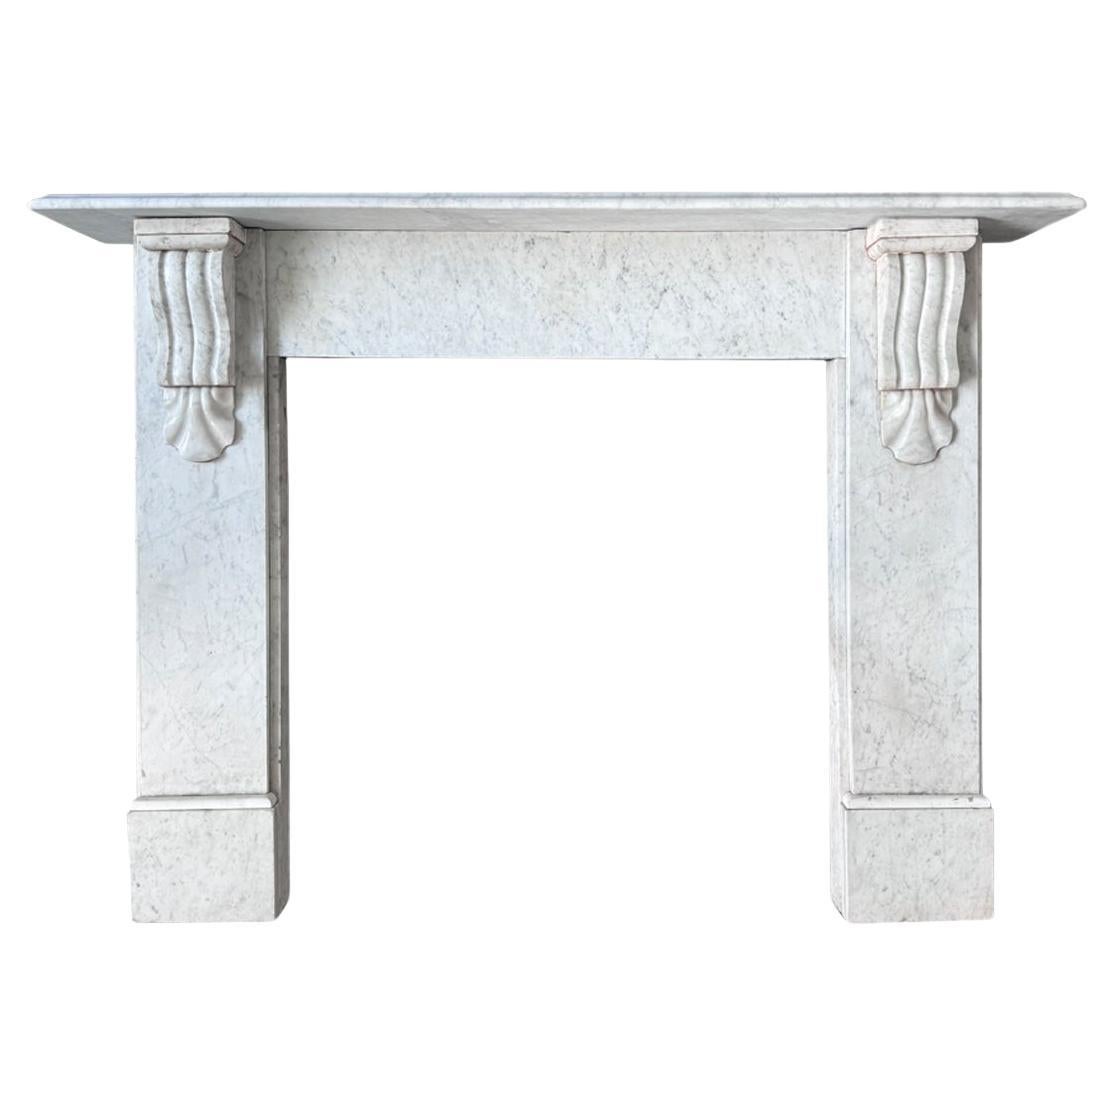 Reclaimed Victorian Corbelled Carrara marble fireplace surround